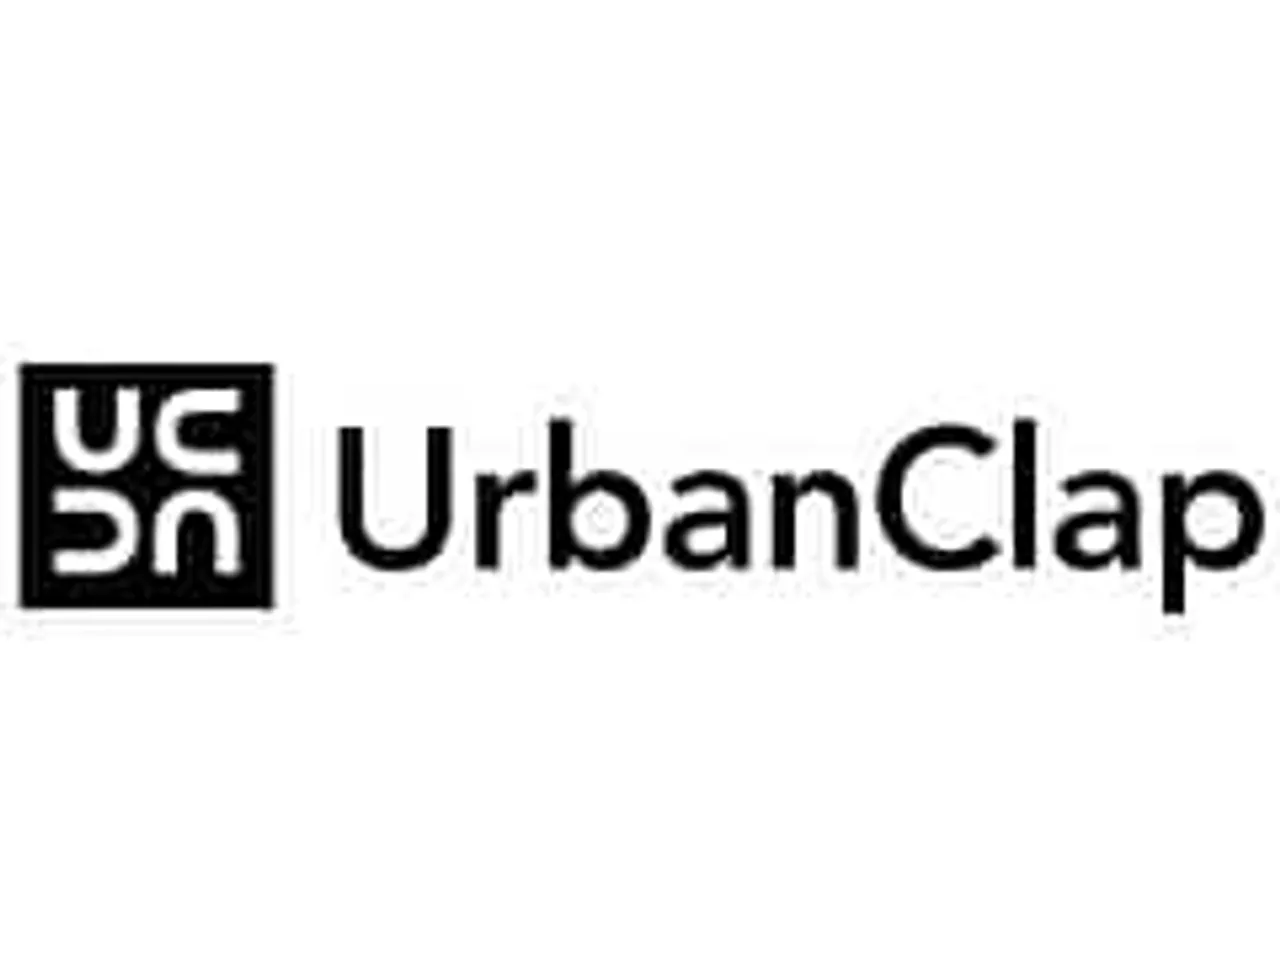 UrbanClap sets new milestone after successfully servicingits One Millionth Request